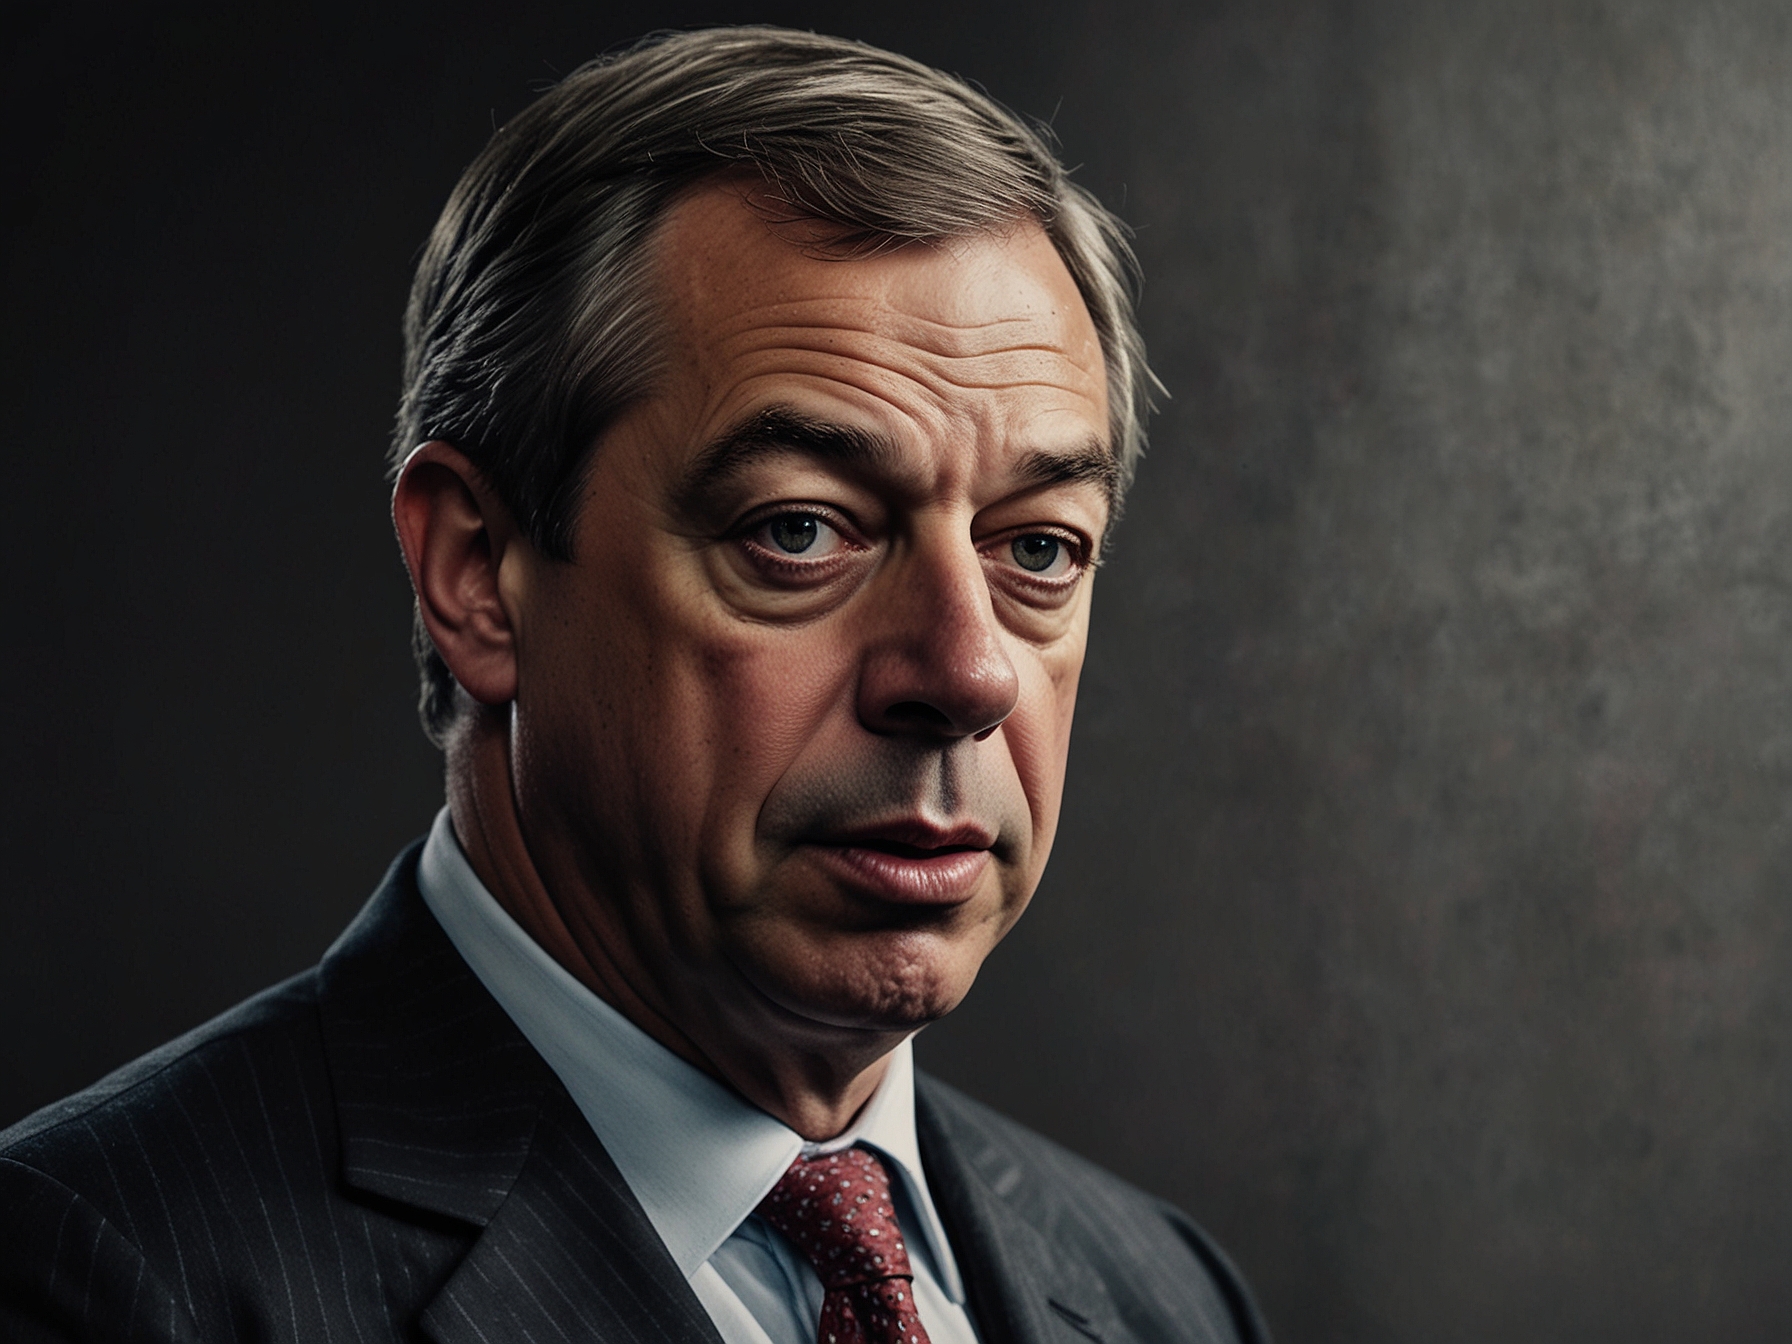 Nigel Farage during the BBC Panorama special, passionately defending his views on the Russian-Ukraine conflict, with intense scrutiny from the show's investigative journalists.